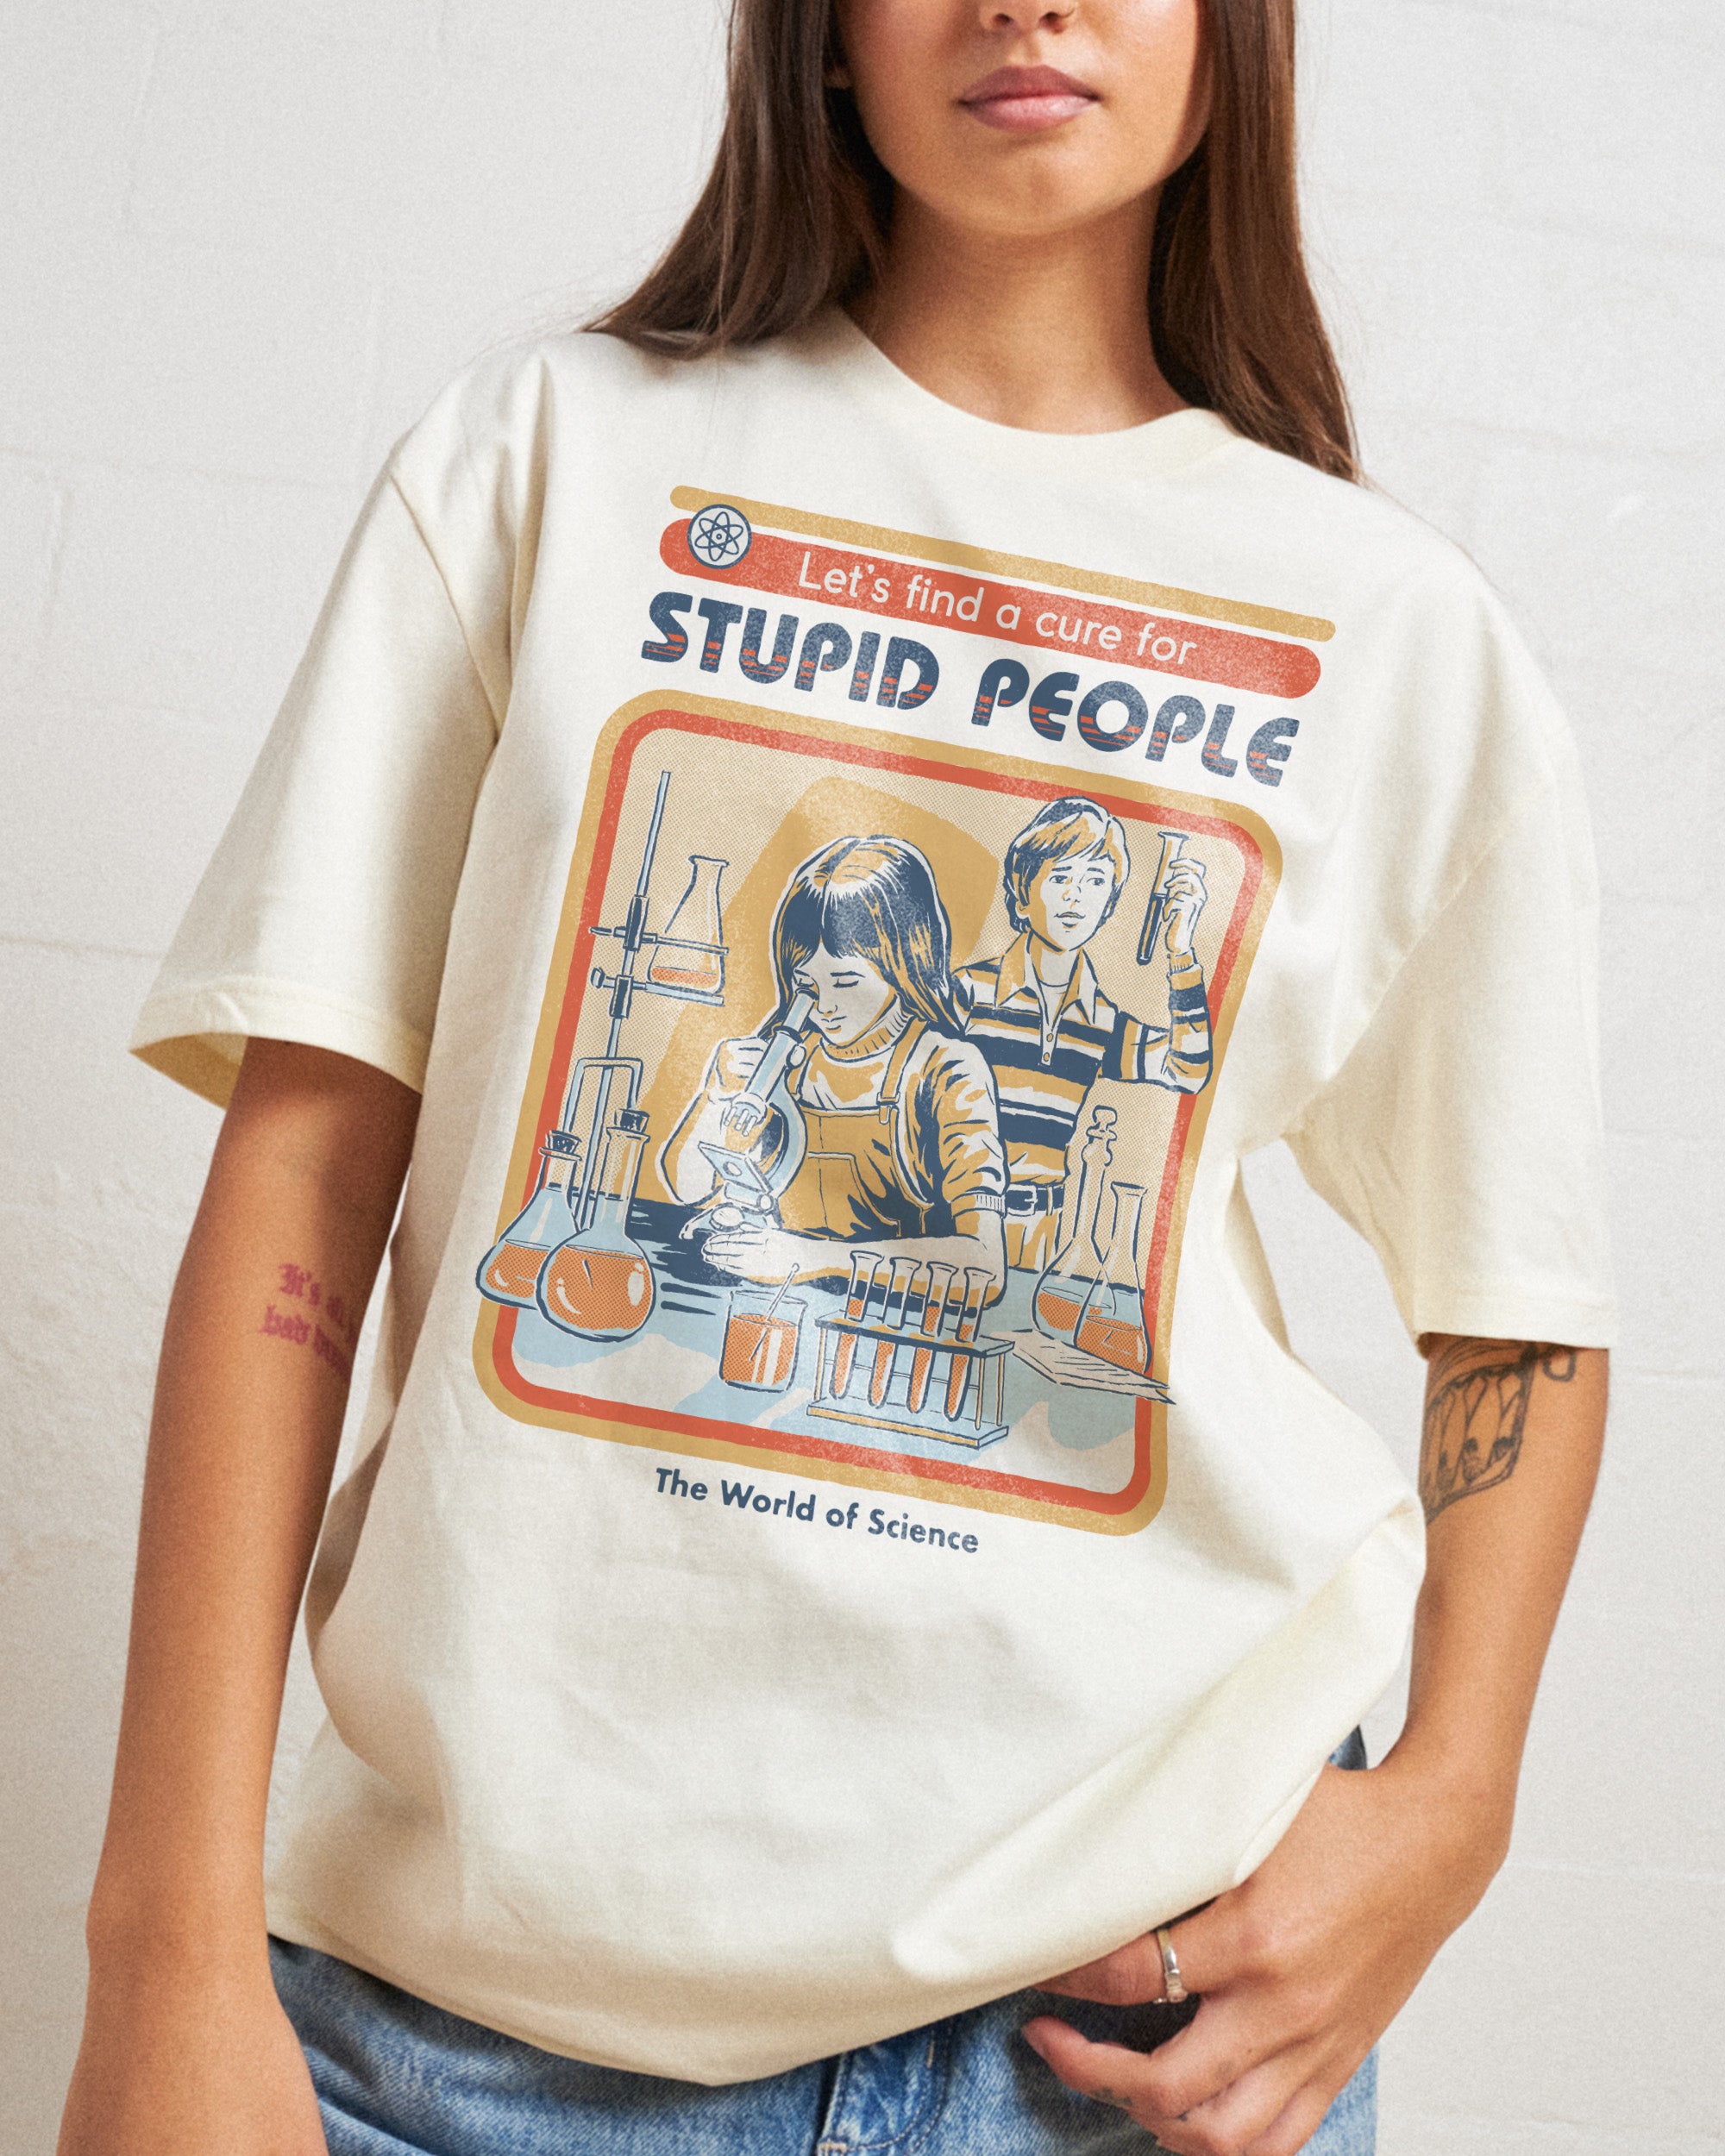 Let's Find a Cure for Stupid People T-Shirt